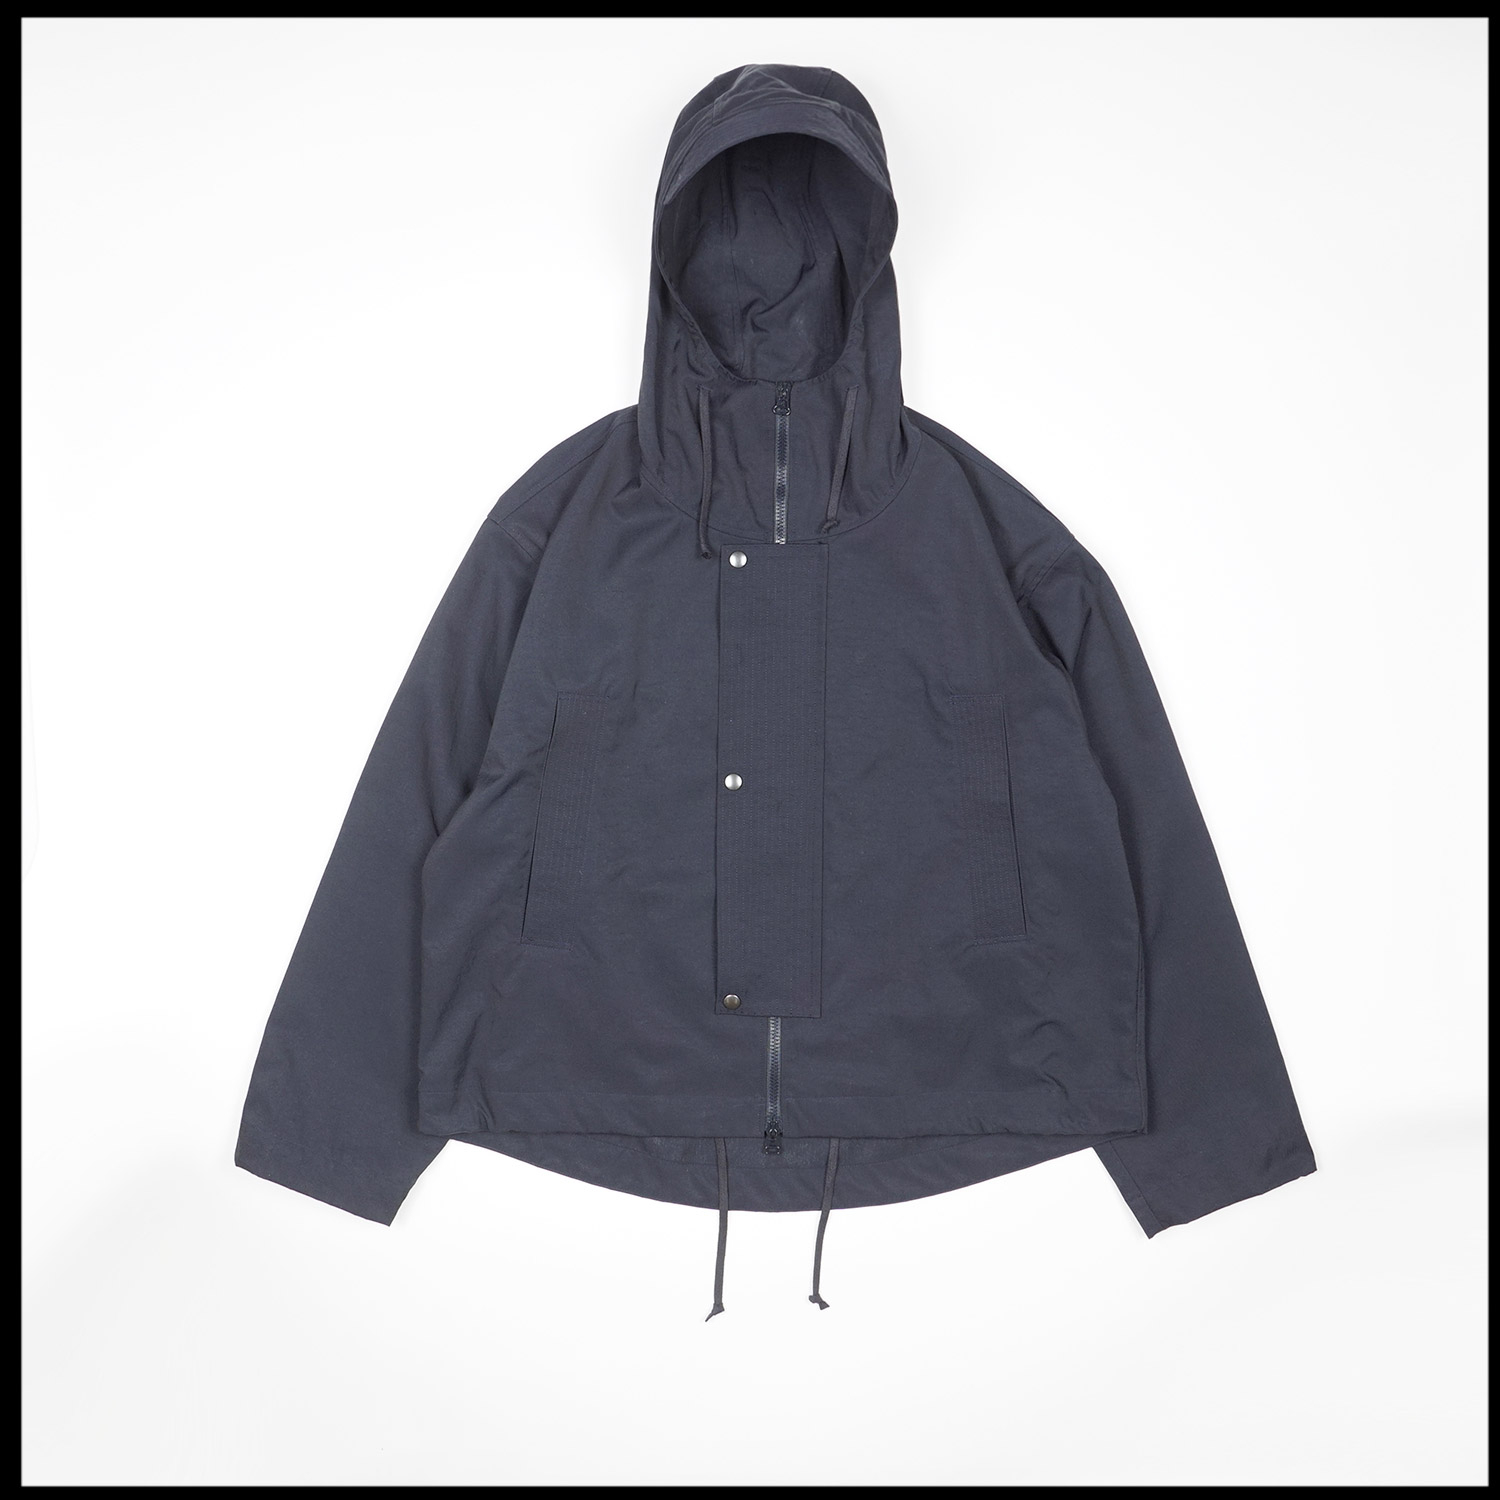 ACTIVE JACKET in Midnight blue color by Arpenteur